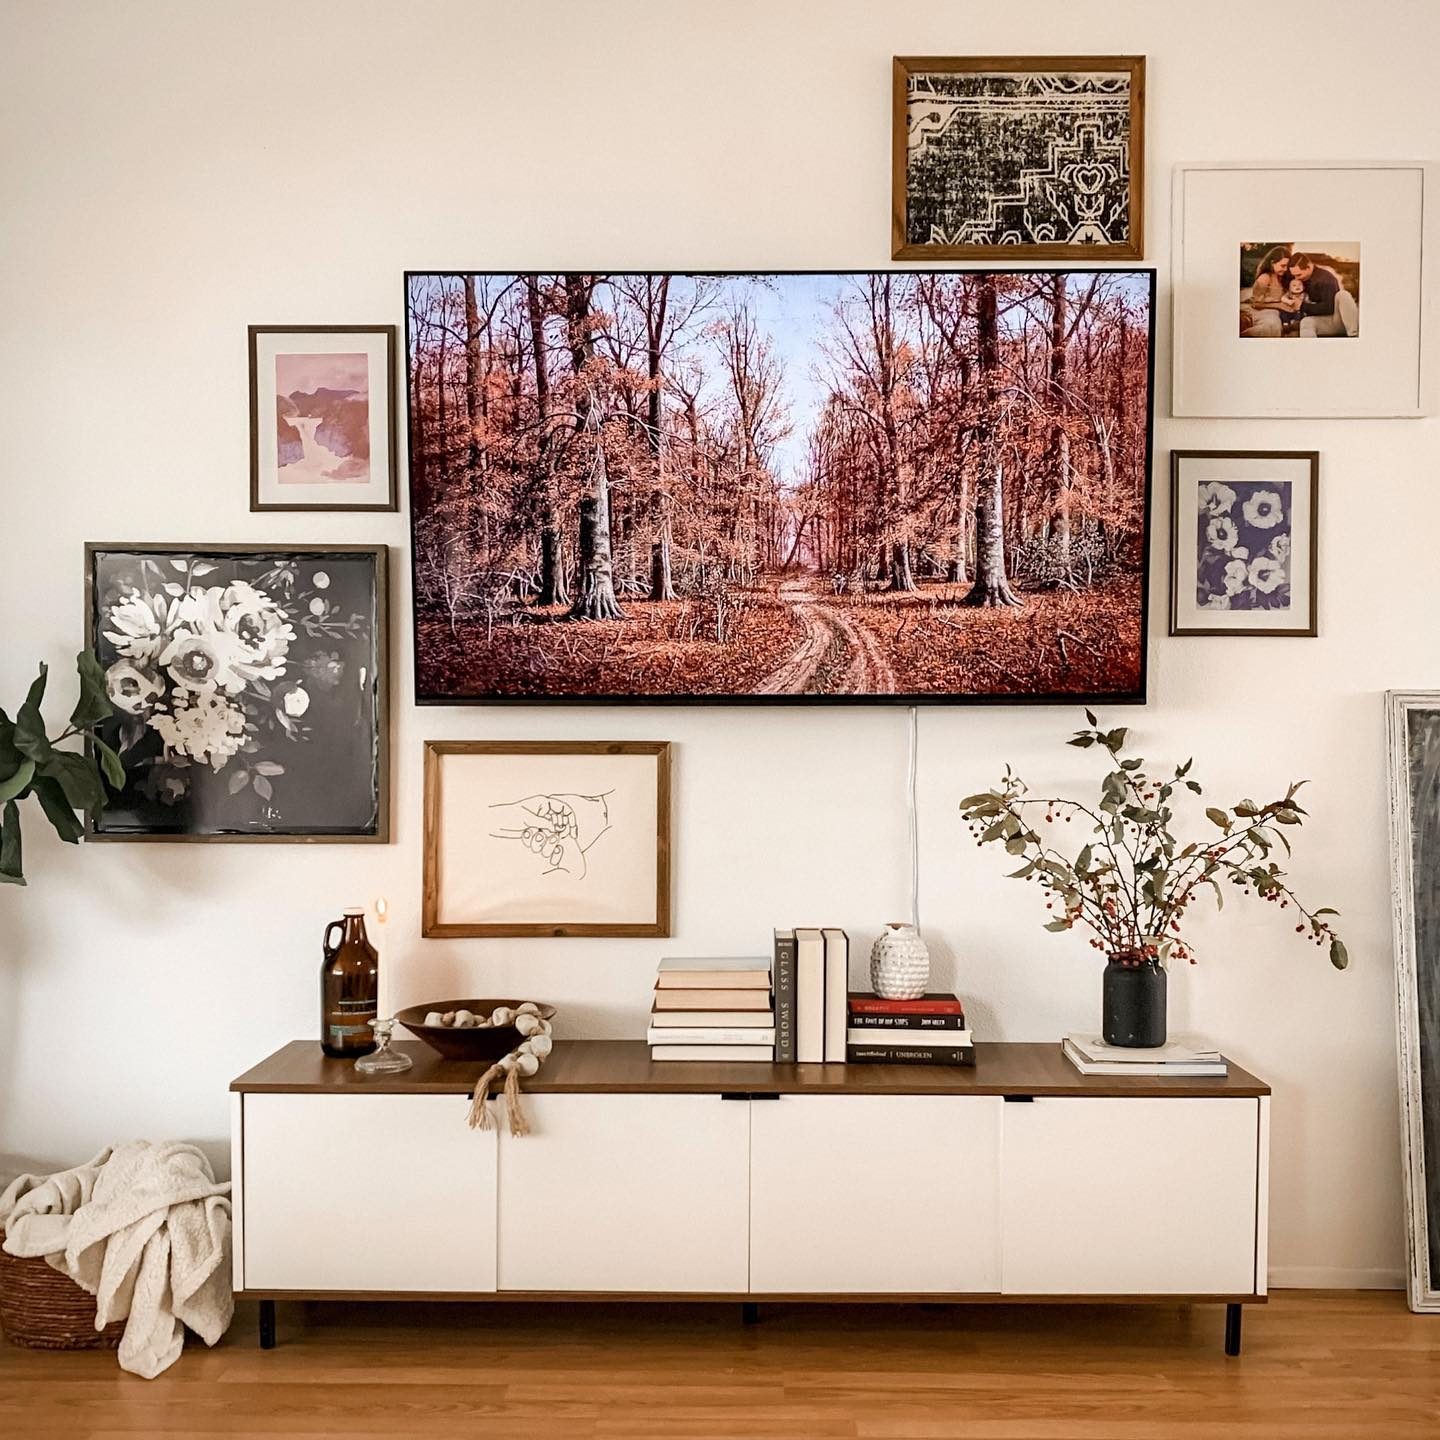 Ideas for Decorating a TV Wall